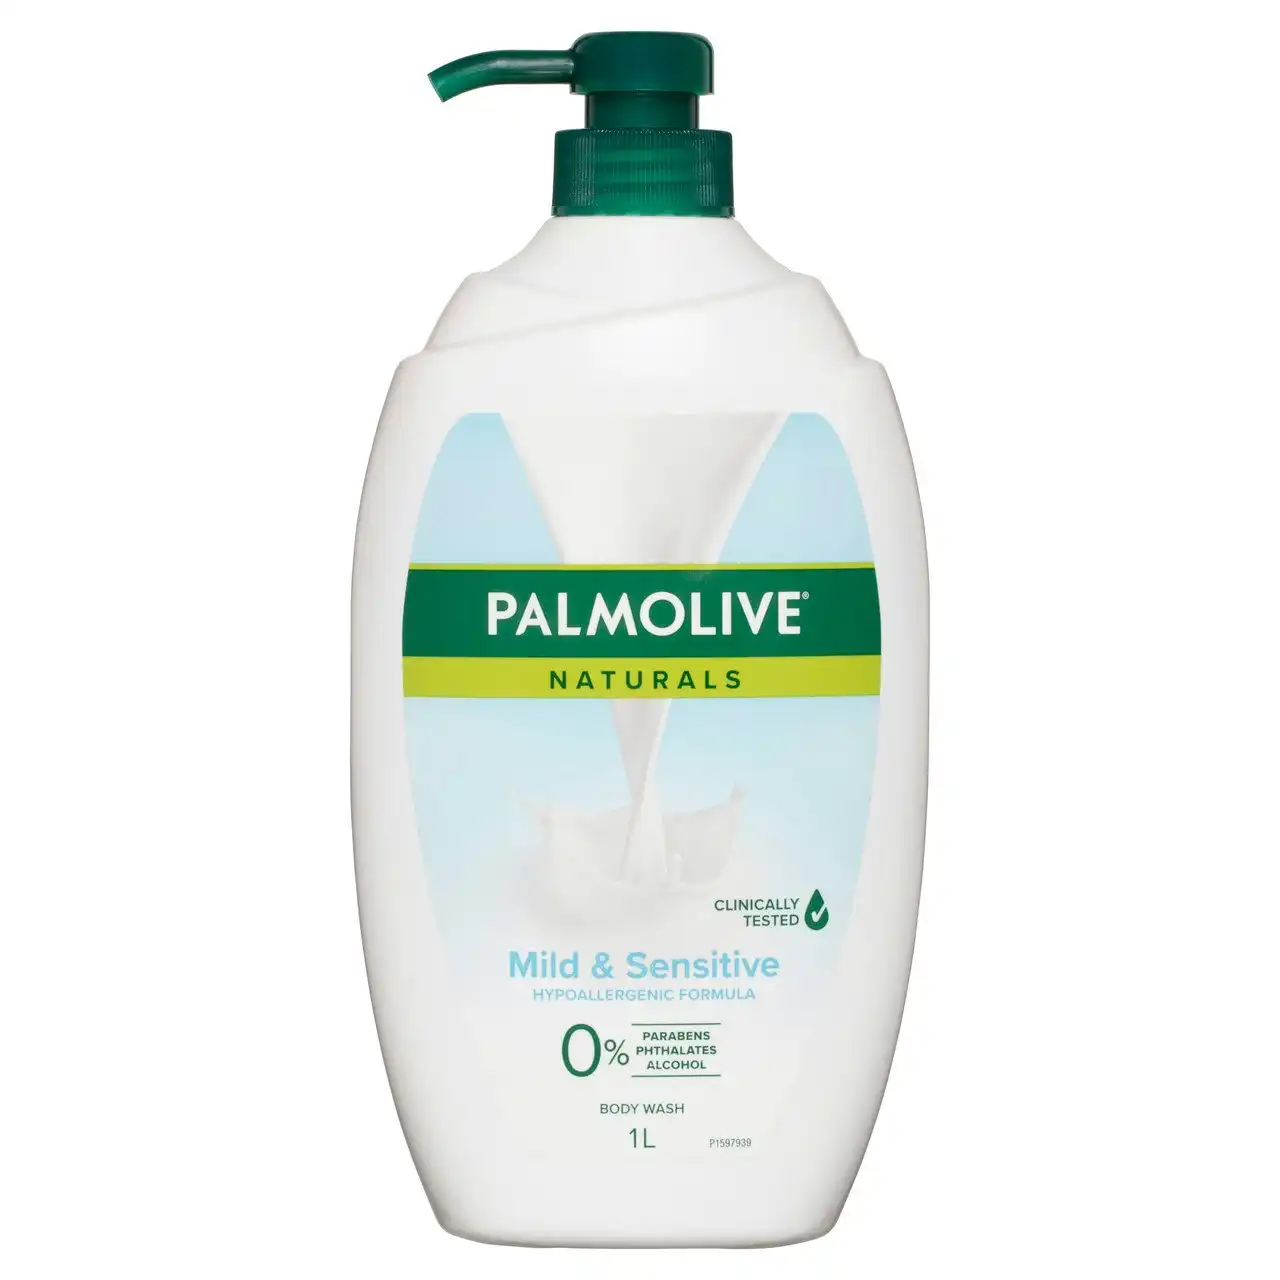 Palmolive Naturals Body Wash 1L Mild & Sensitive Soap Free Shower Gel, Clinically Tested, Non Irritating, Hypoallergenic